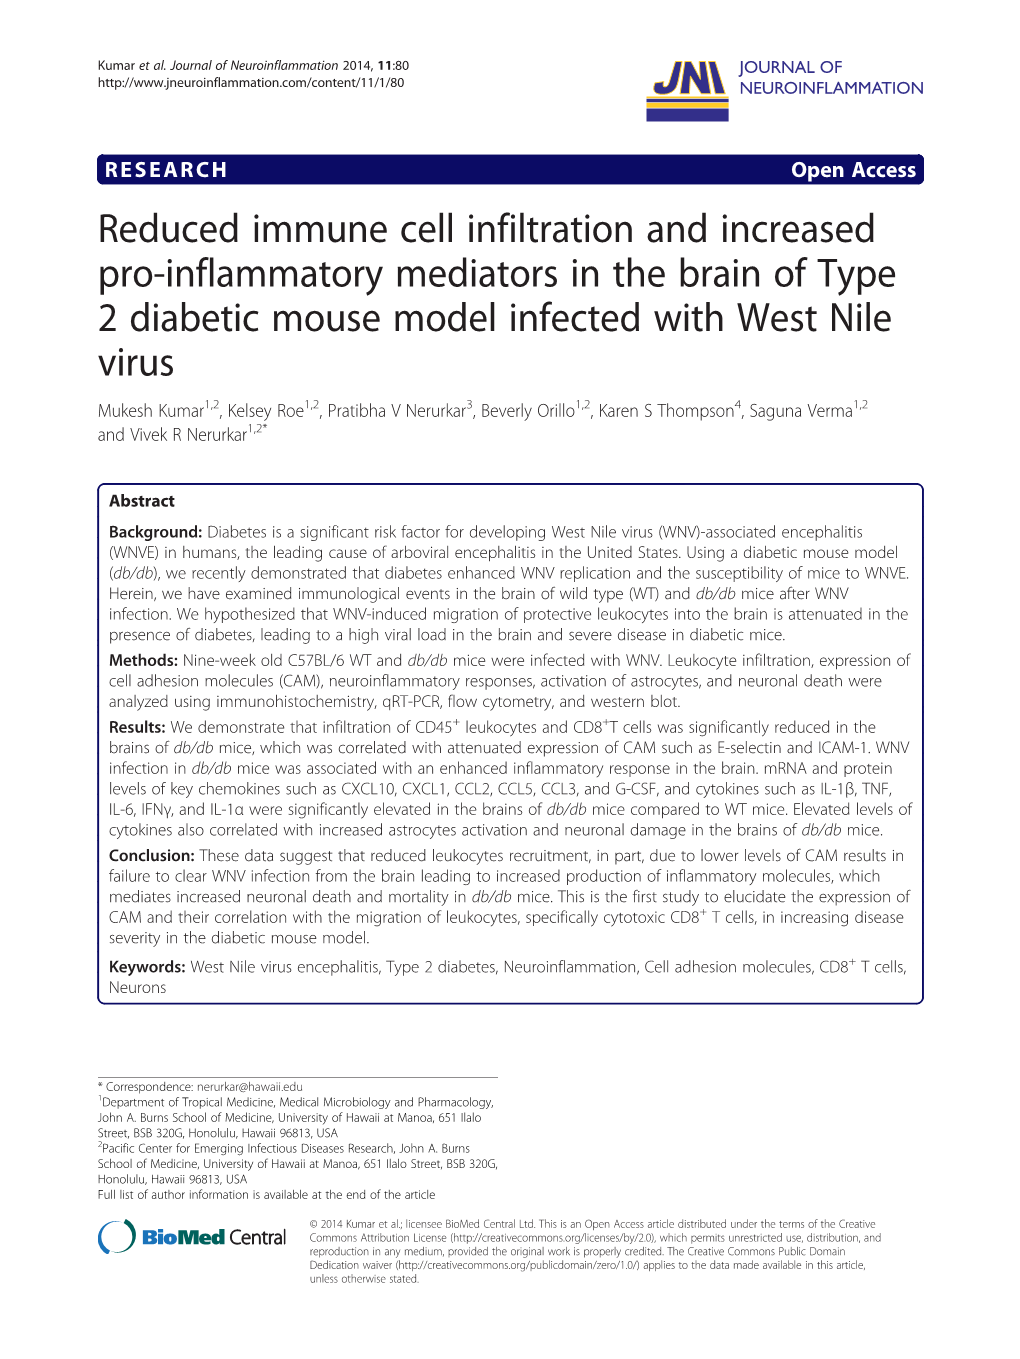 Reduced Immune Cell Infiltration and Increased Pro-Inflammatory